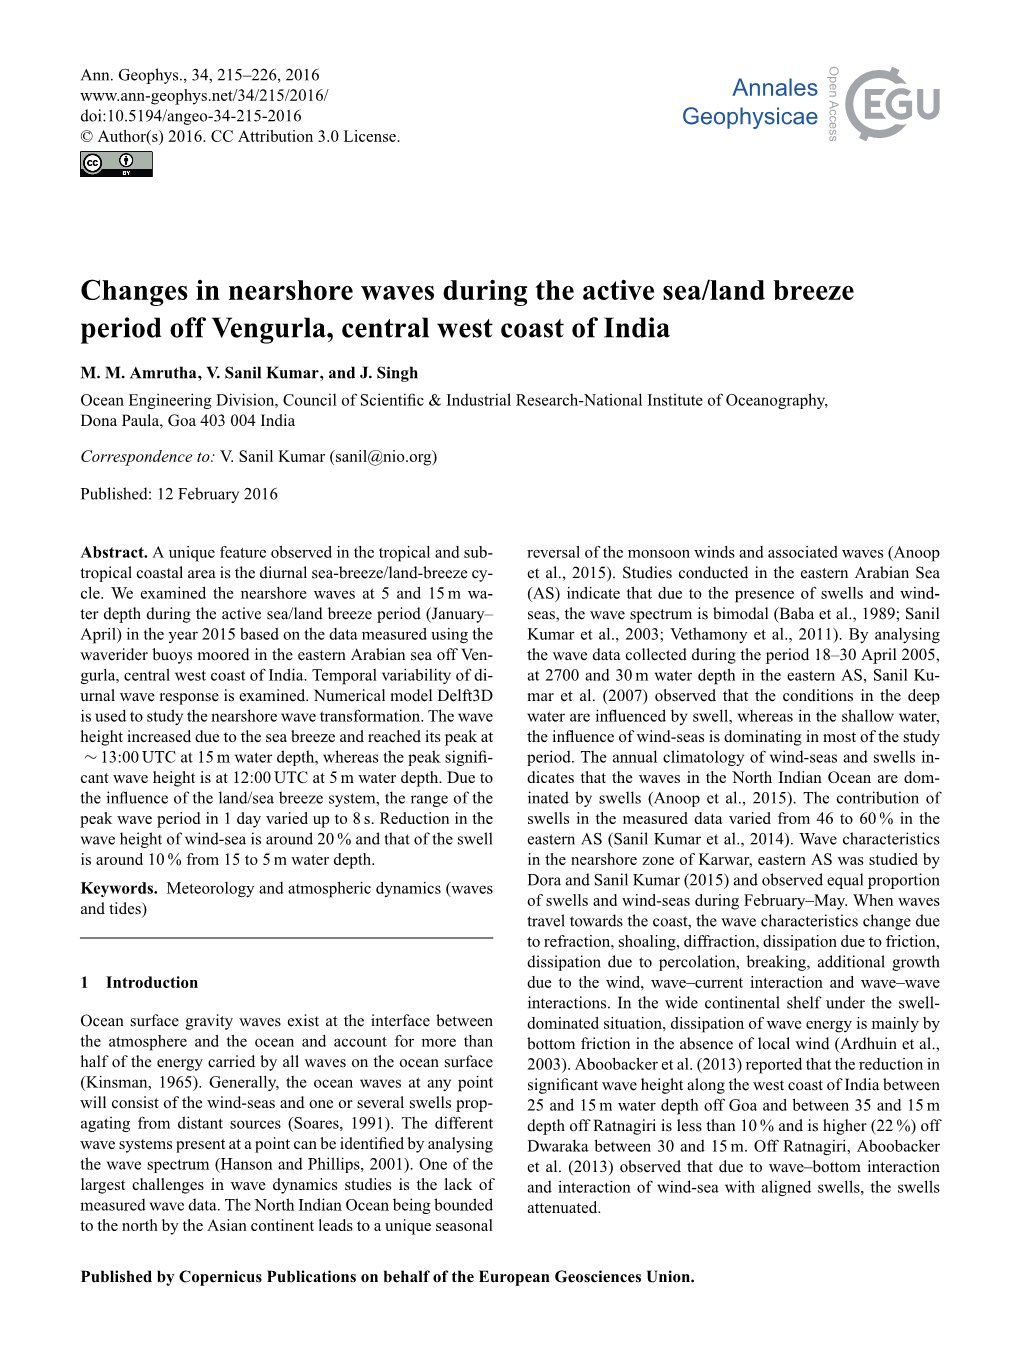 Changes in Nearshore Waves During the Active Sea/Land Breeze Period Off Vengurla, Central West Coast of India